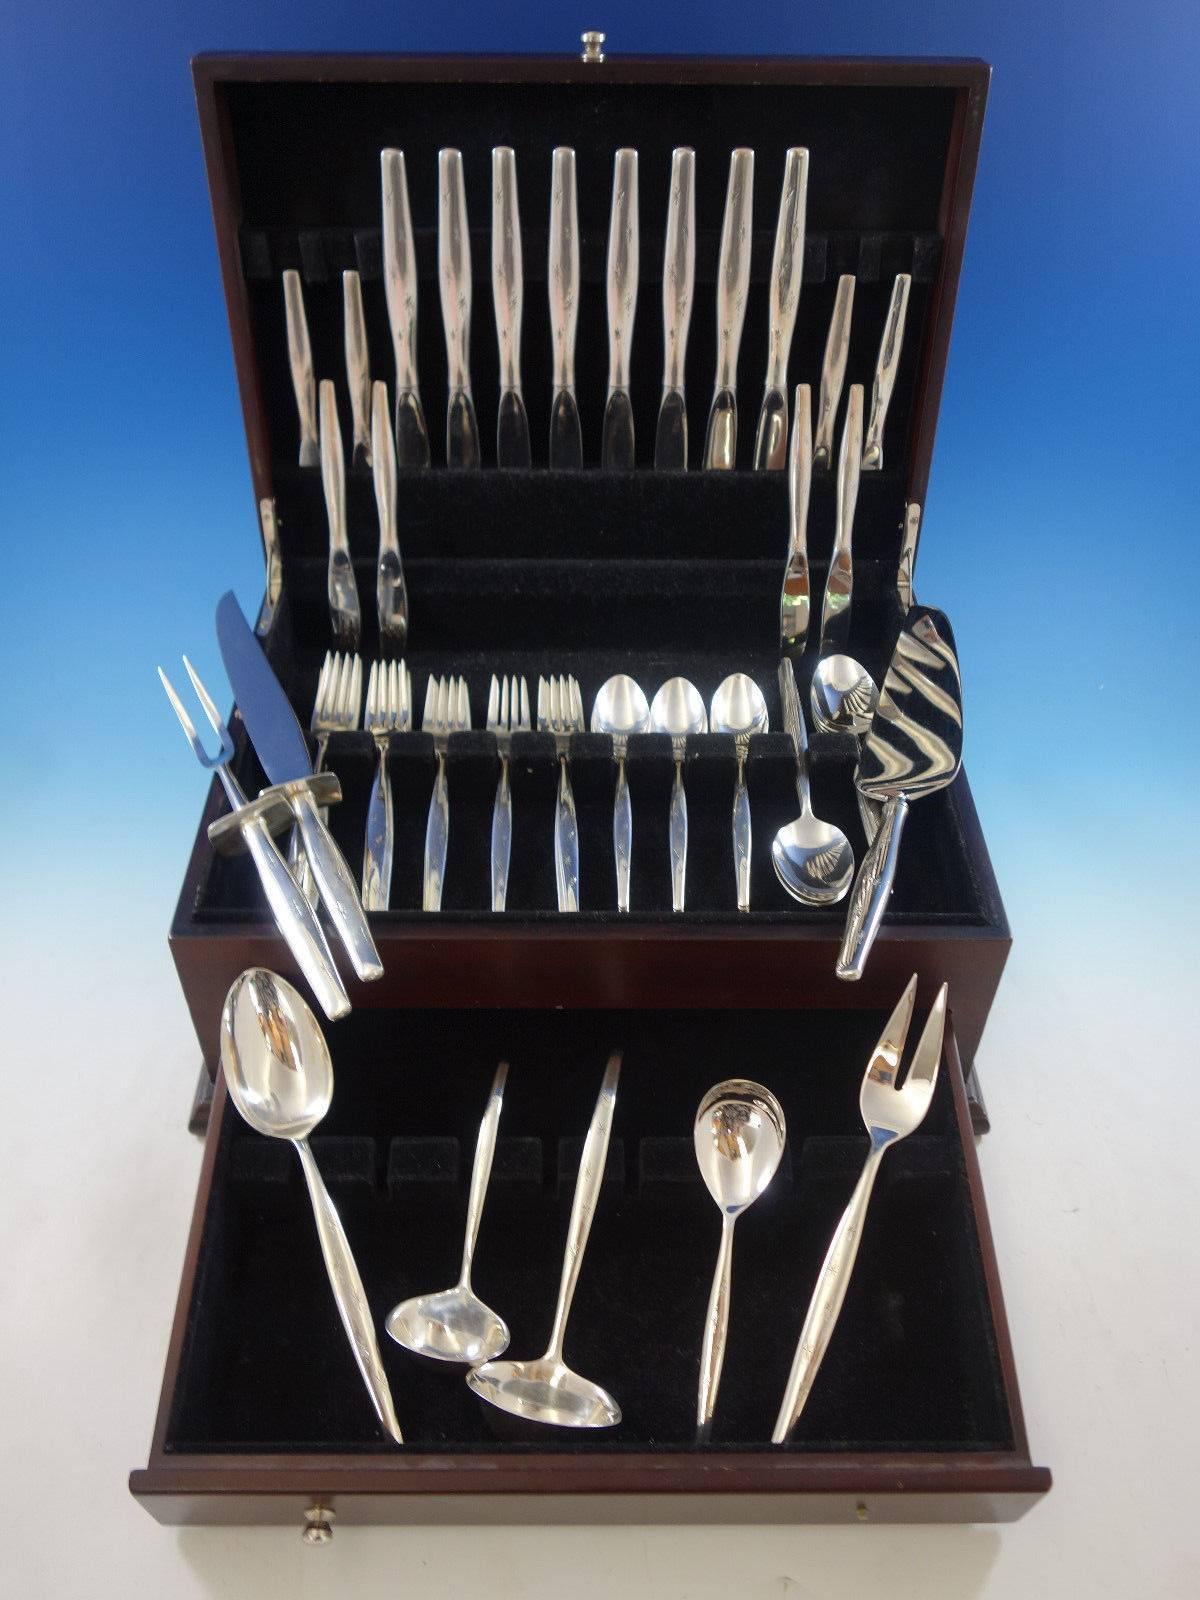 Stardust by Gorham sterling silver flatware set of 56 pieces. This set includes: Eight knives, 9